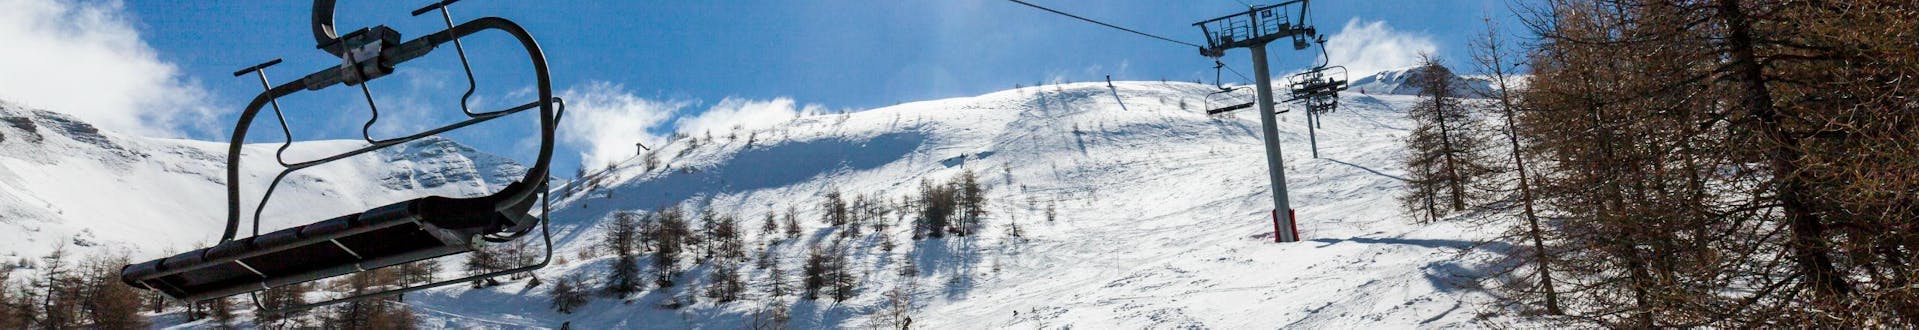 A chair lift is ascending up the mountain in Les Orres, while a group of skiers partaking in a set of ski lessons organised by one of the local ski schools is riding down the slope below.